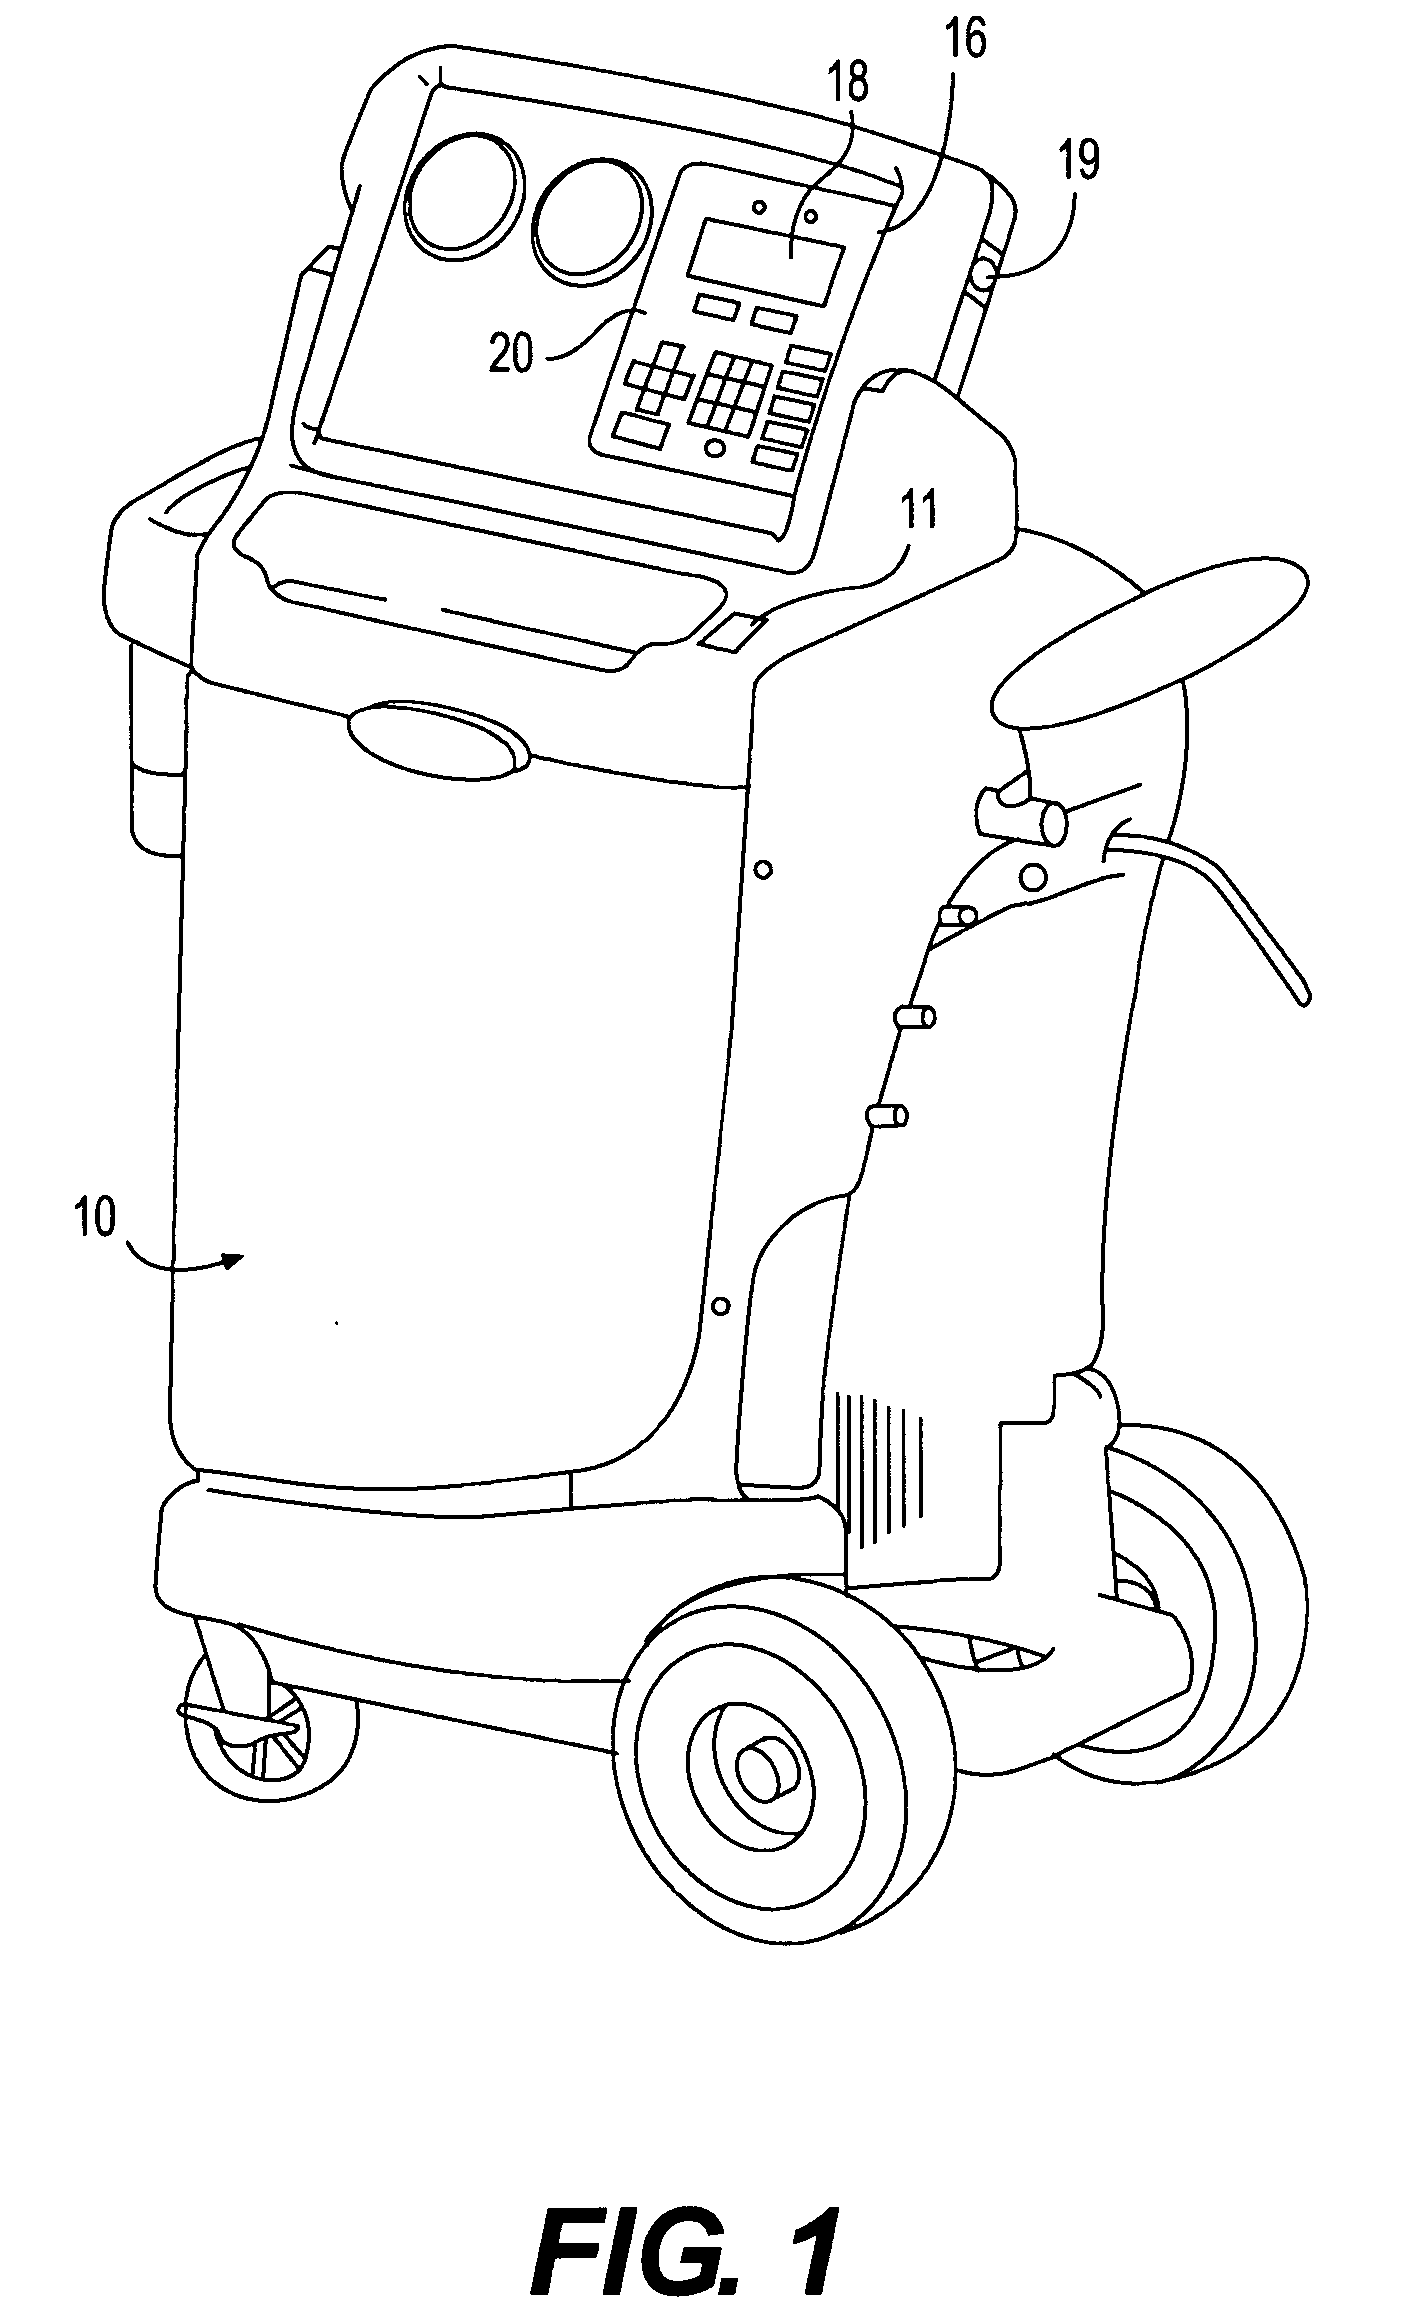 Component identification system and method